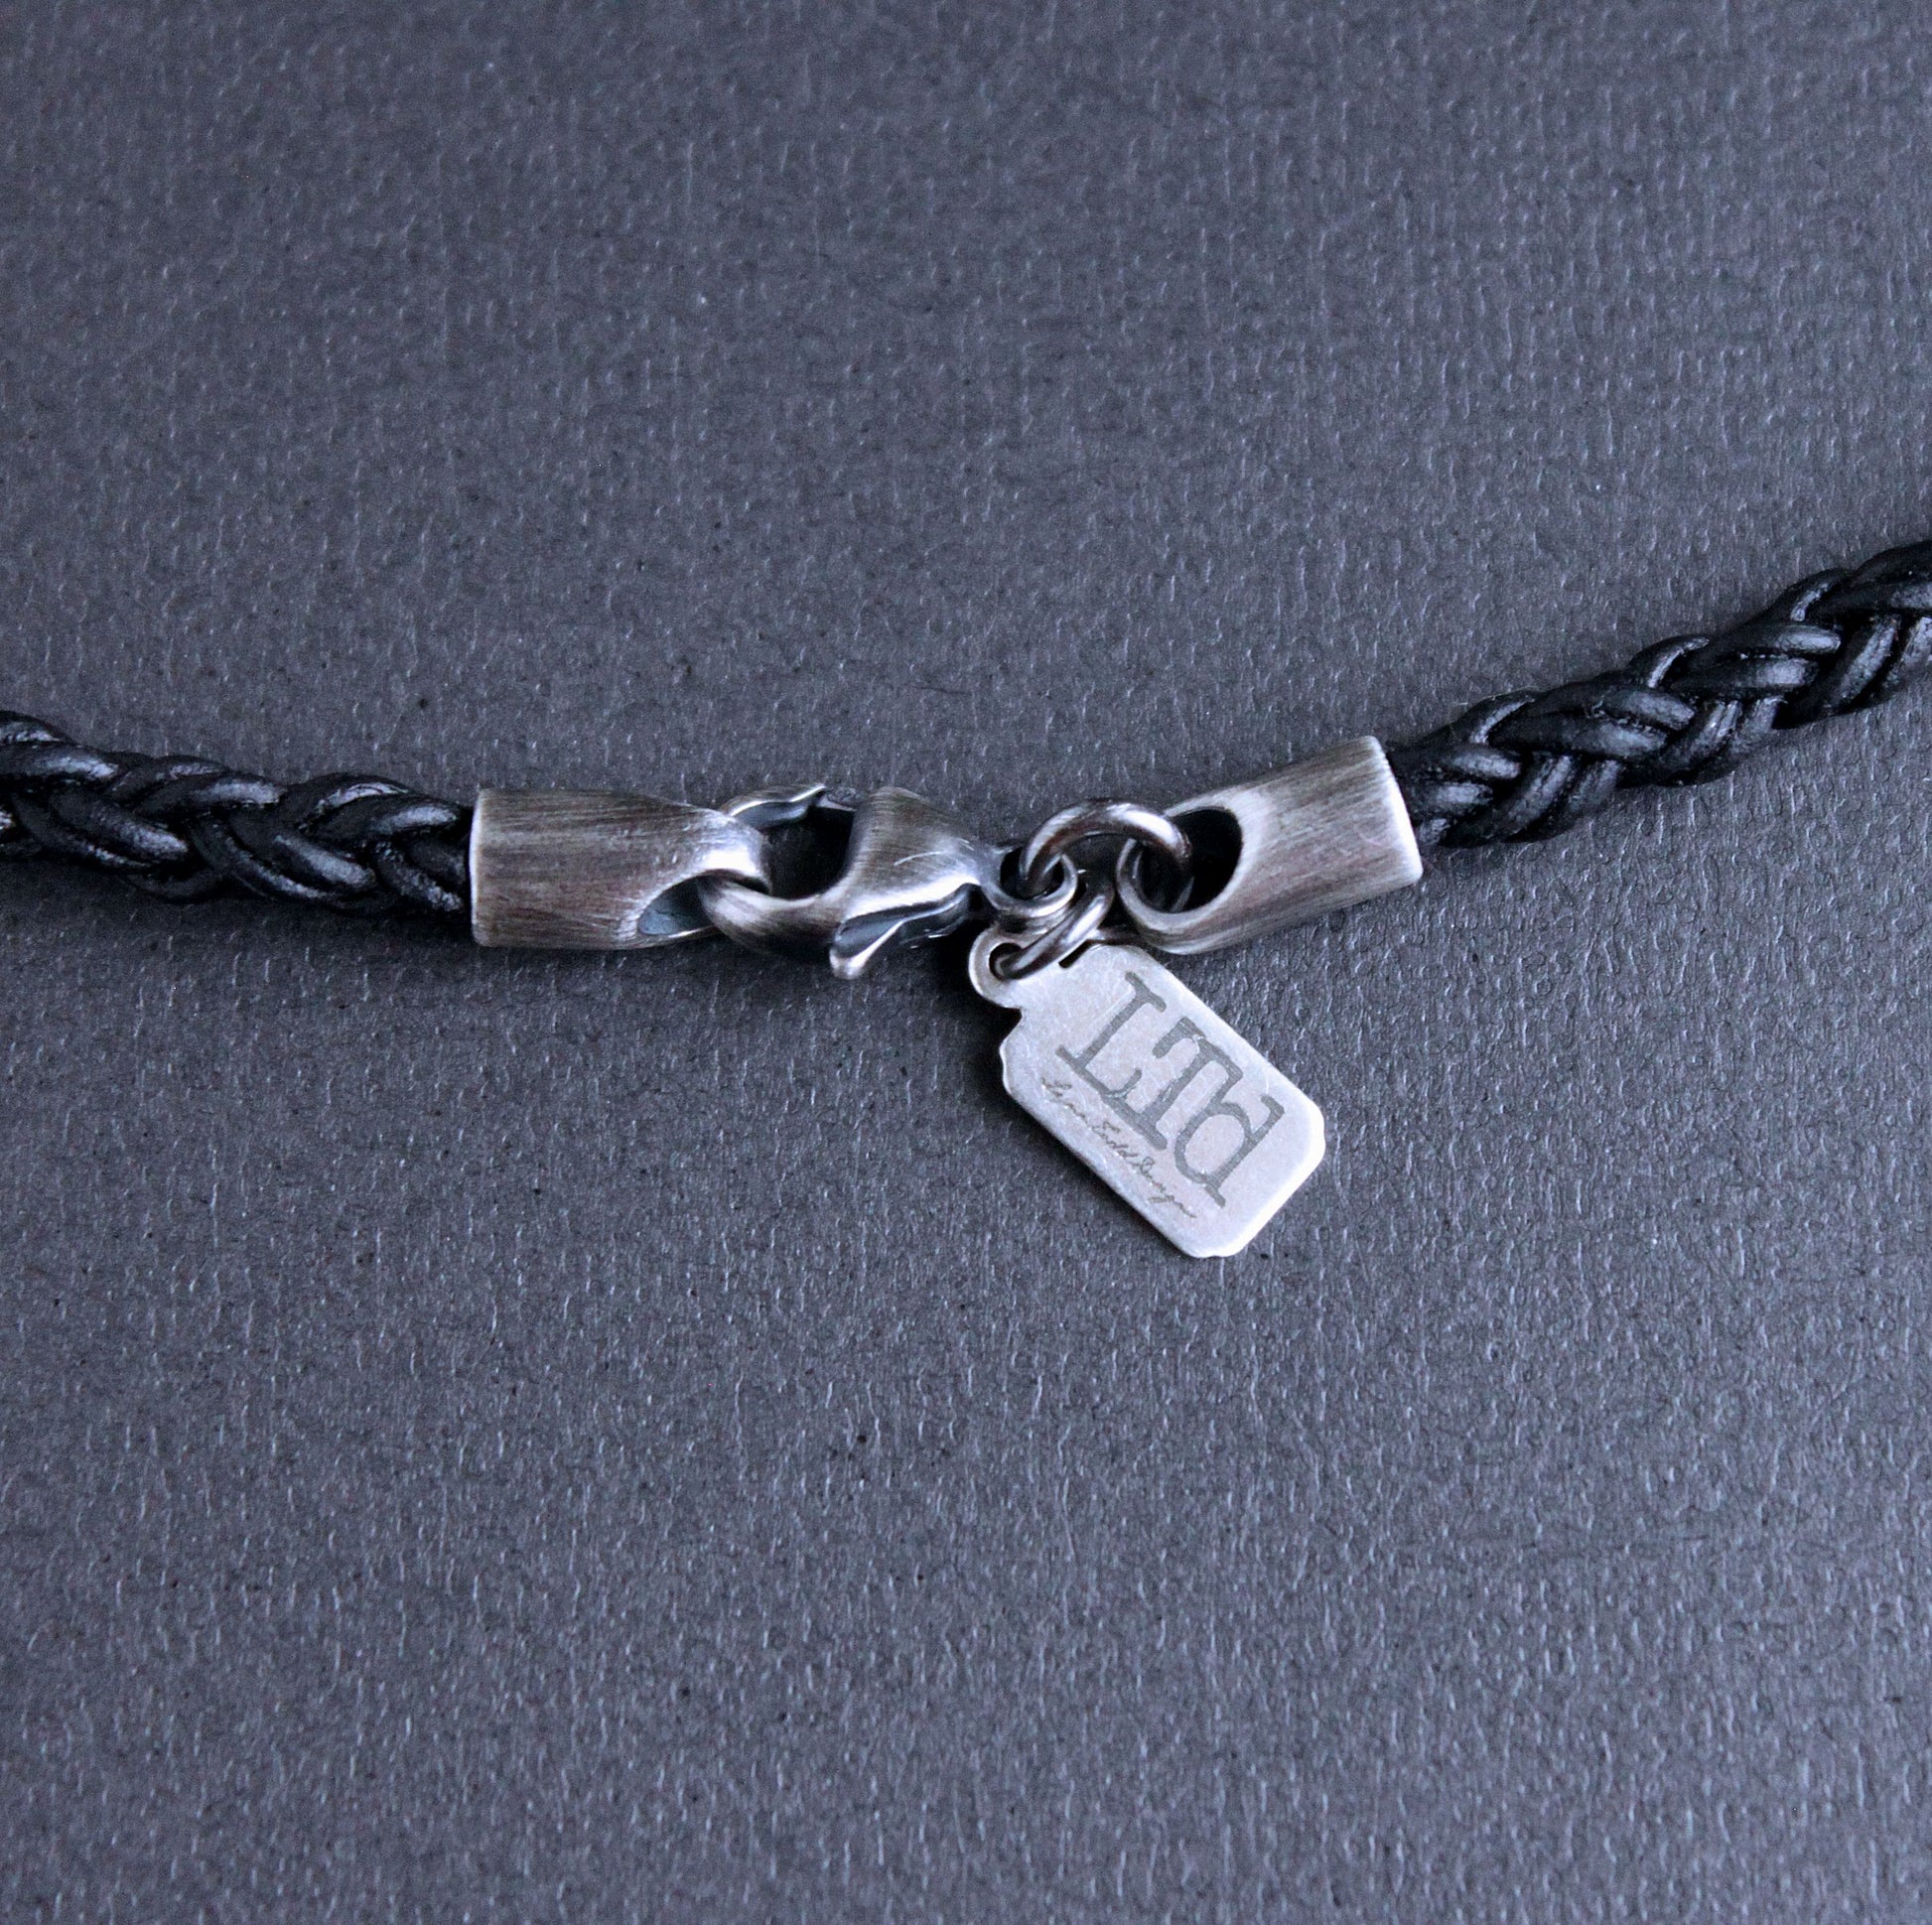 Black Genuine Leather Cord Necklace Chain Stainless Steel Clasp